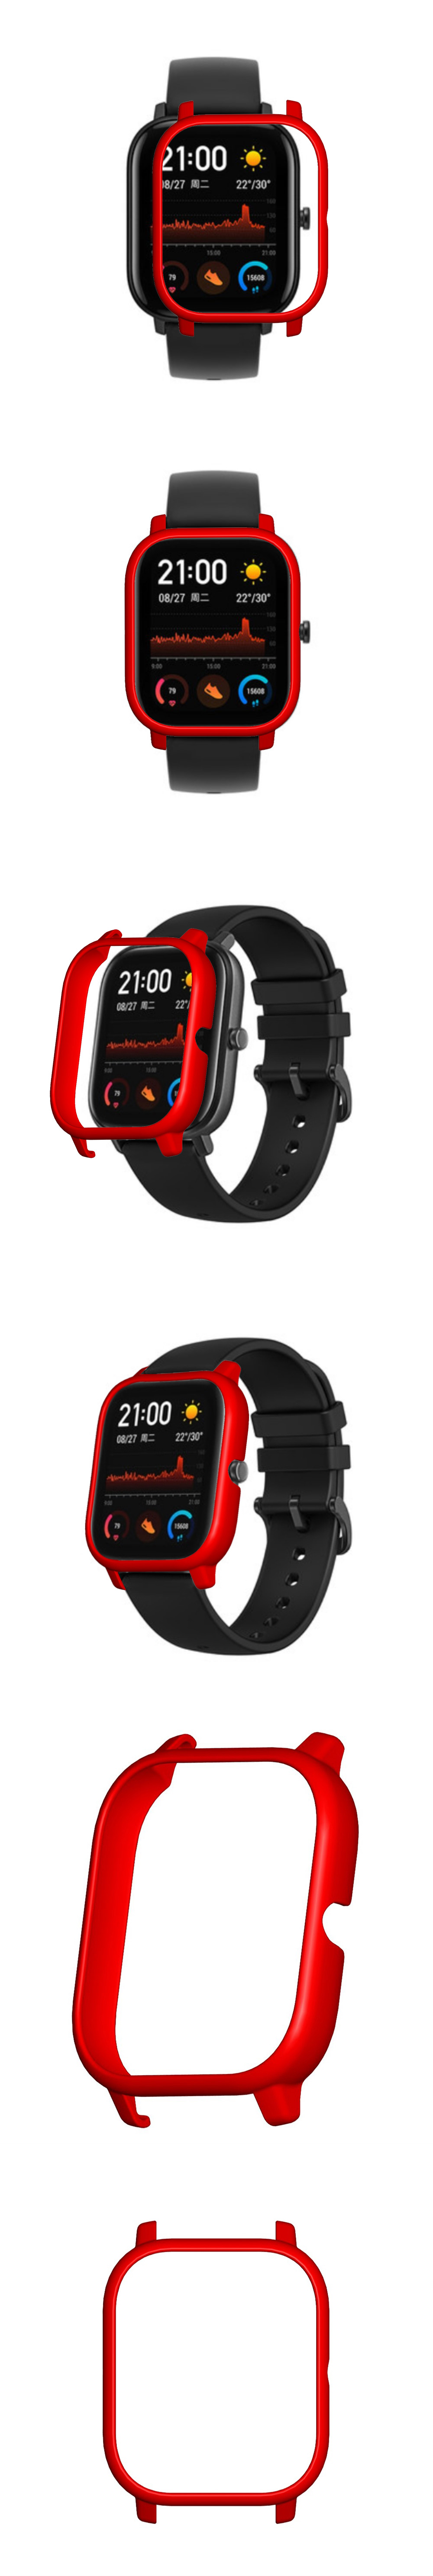 Color-PC-Watch-Case-Cover-Watch-Cover-Screen-Protector-for-Amazfit-GTS-1582191-5